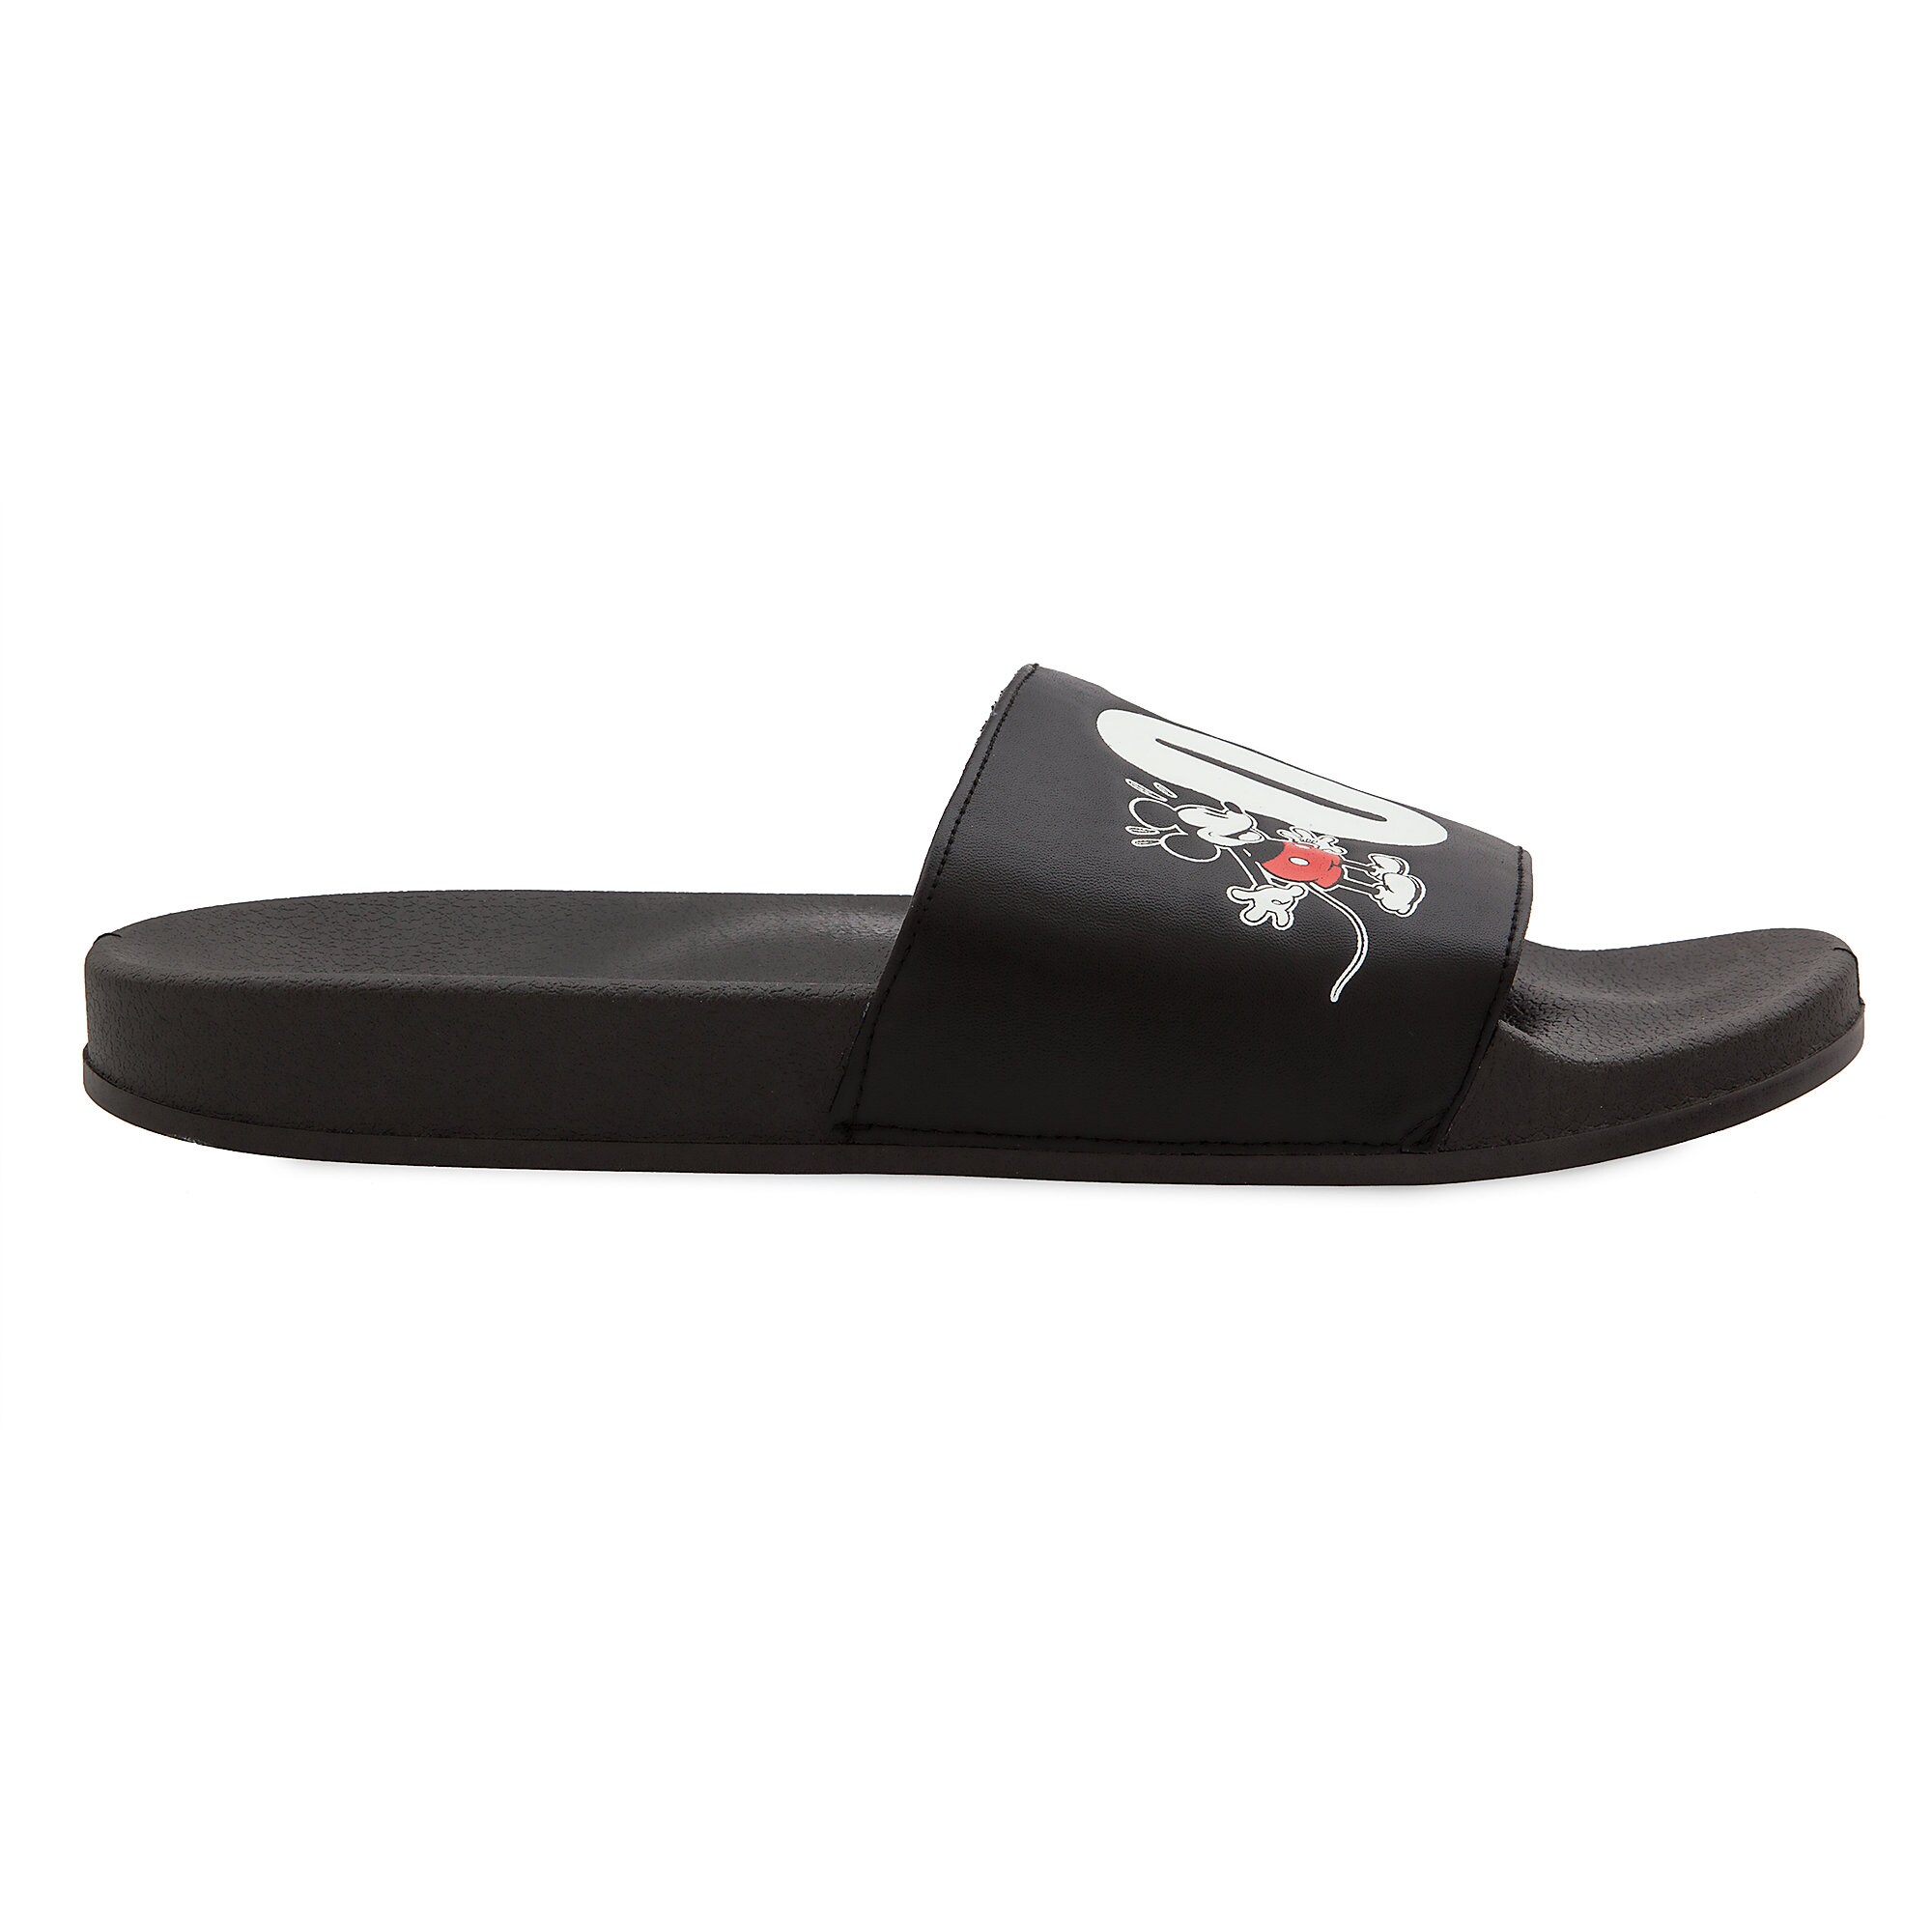 Mickey Mouse Slides for Men - Oh My Disney